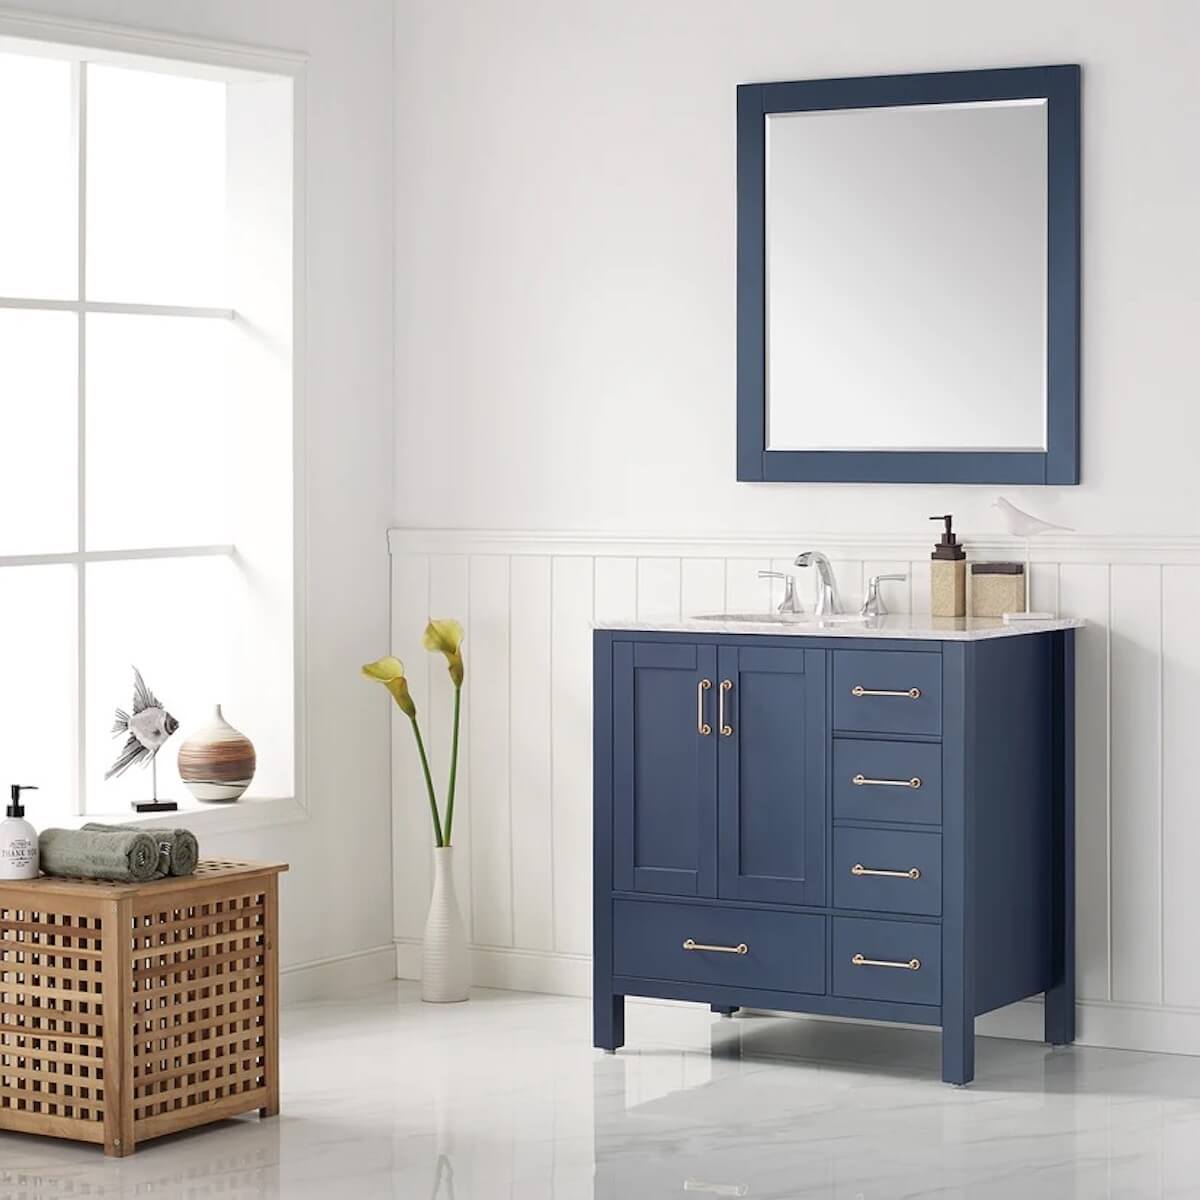 Vinnova 36” Gela Royal Blue Freestanding Single Vanity with Carrara White Marble Countertop With Mirror in Bathroom Angle 723036-RB-CA